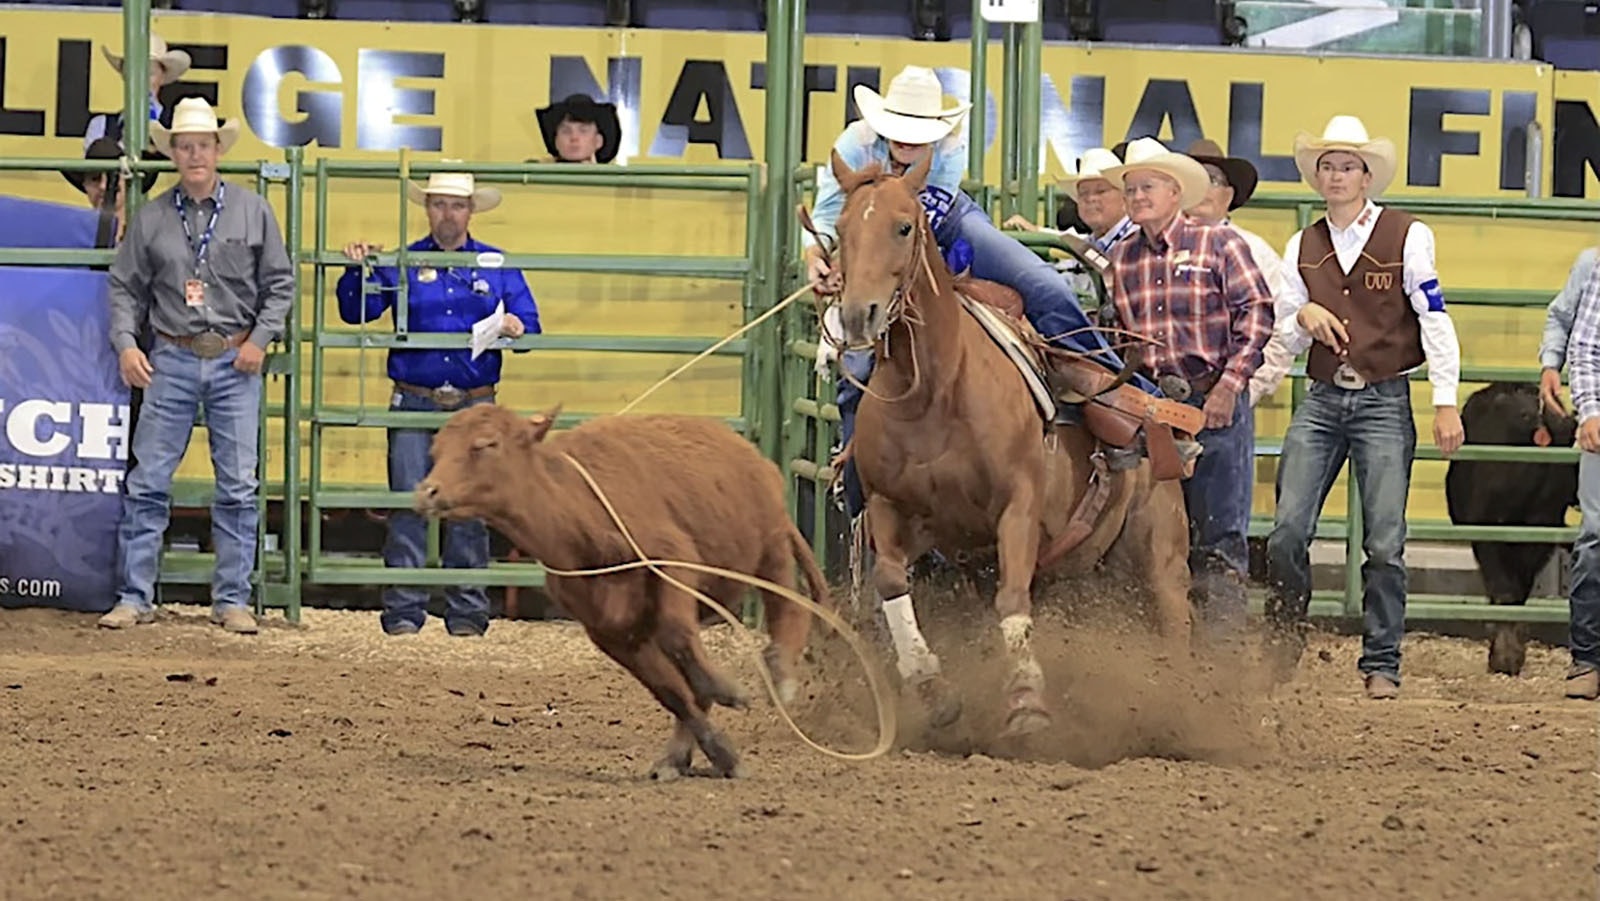 Haiden Thompson competes in breakaway roping at the CNFR in Casper.